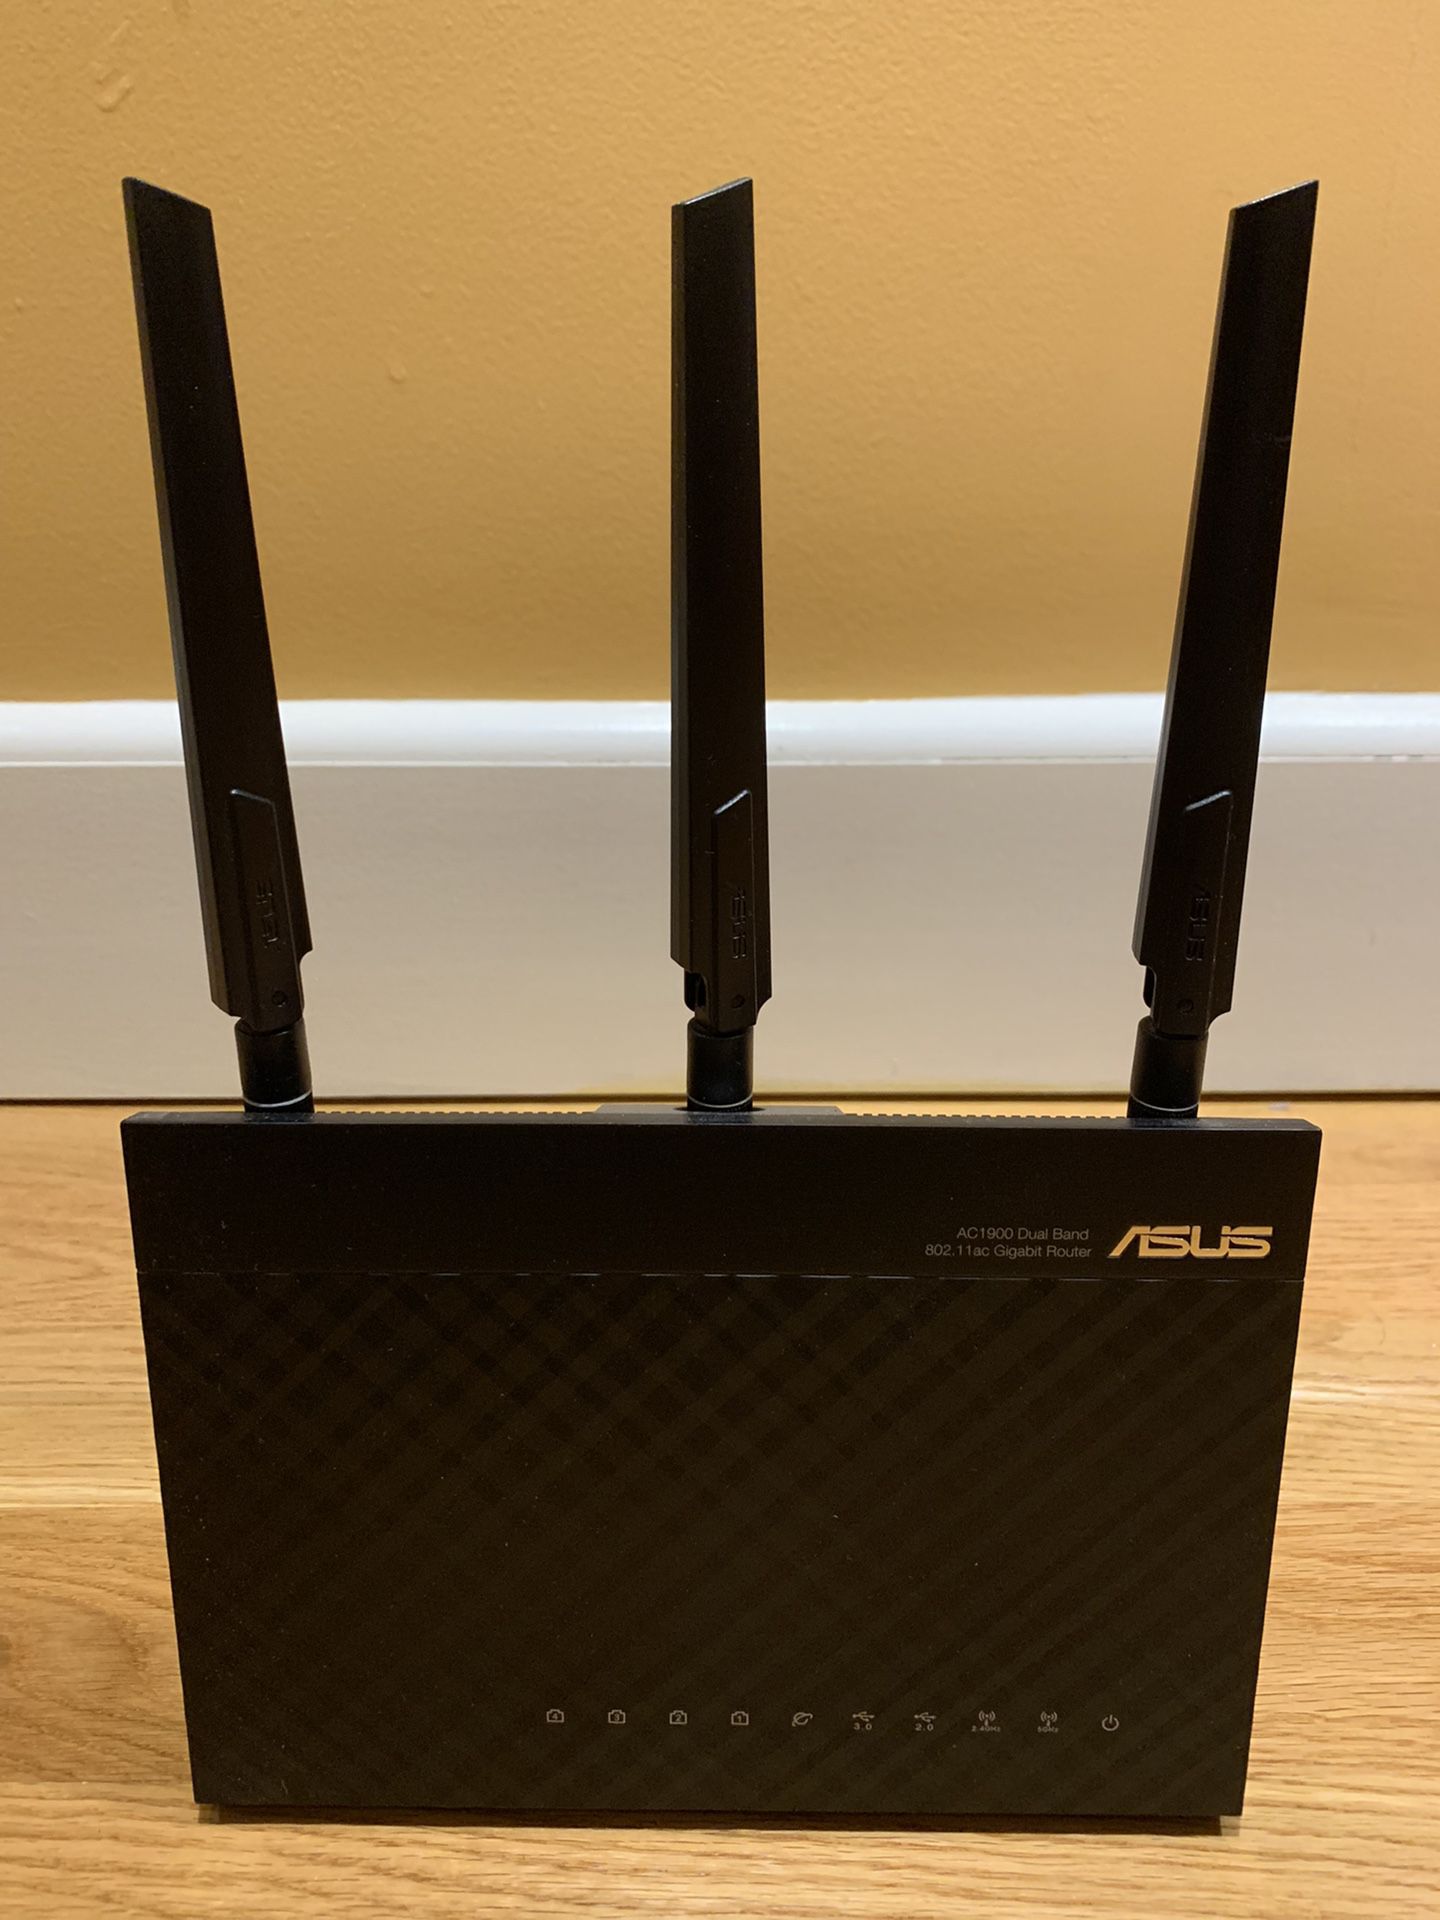 ASUS AC1900 Wi-Fi Router (RT-AC67P) - Dual Band Wireless Internet Router